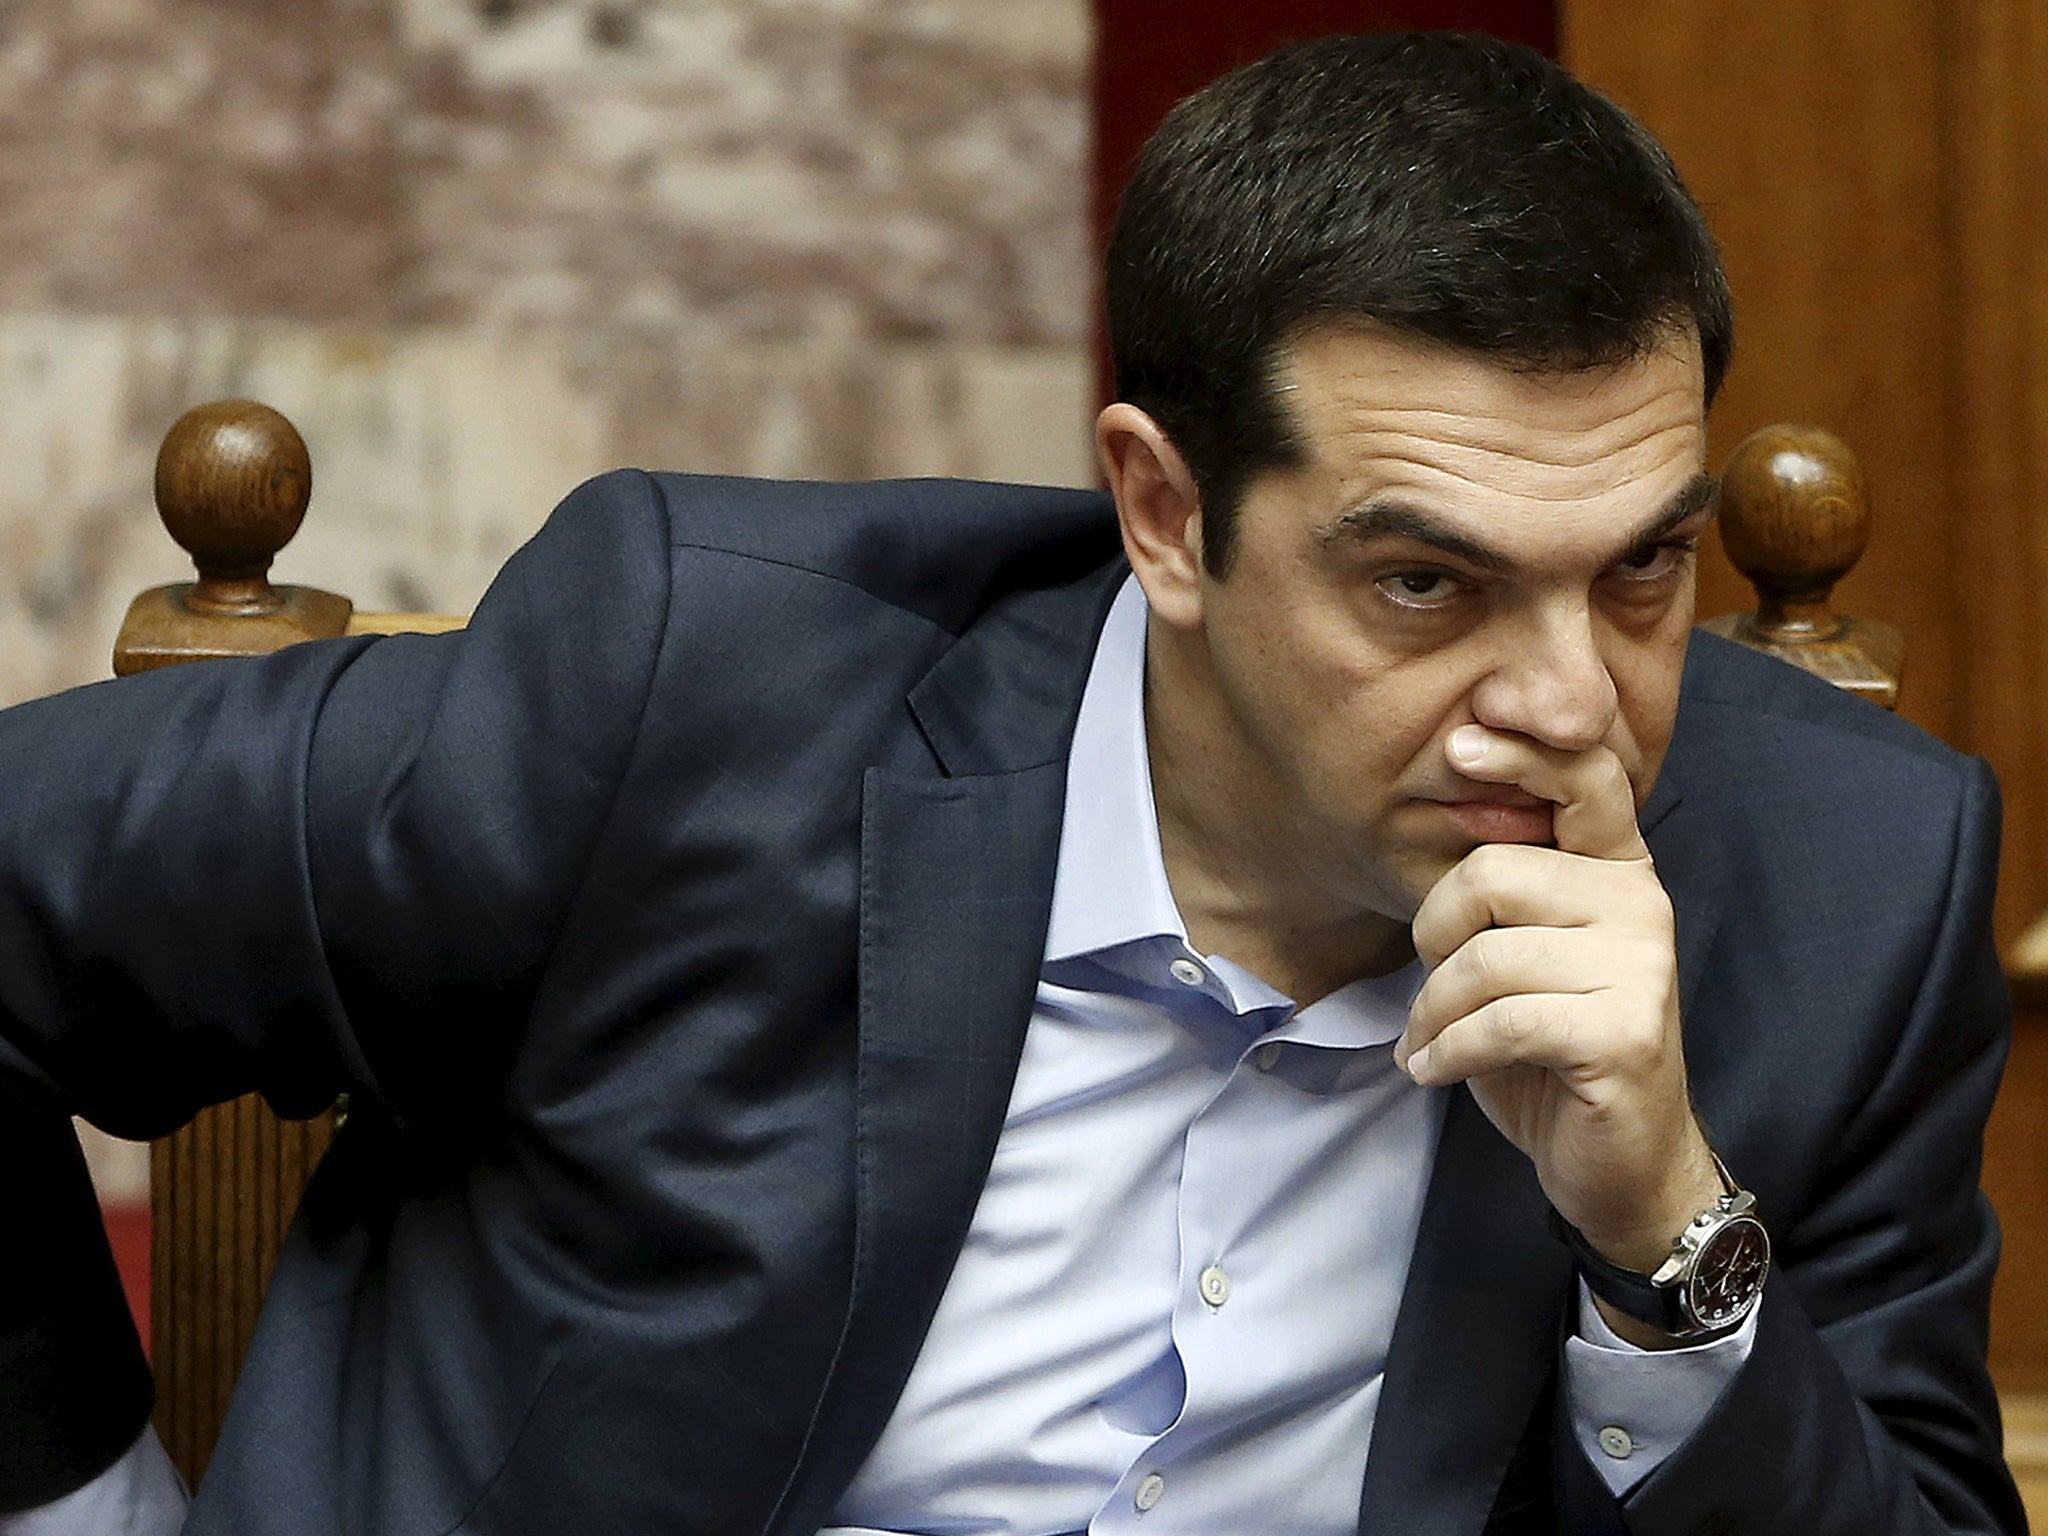 Prime Minister Alexis Tsipras was elected on an anti-austerity platform